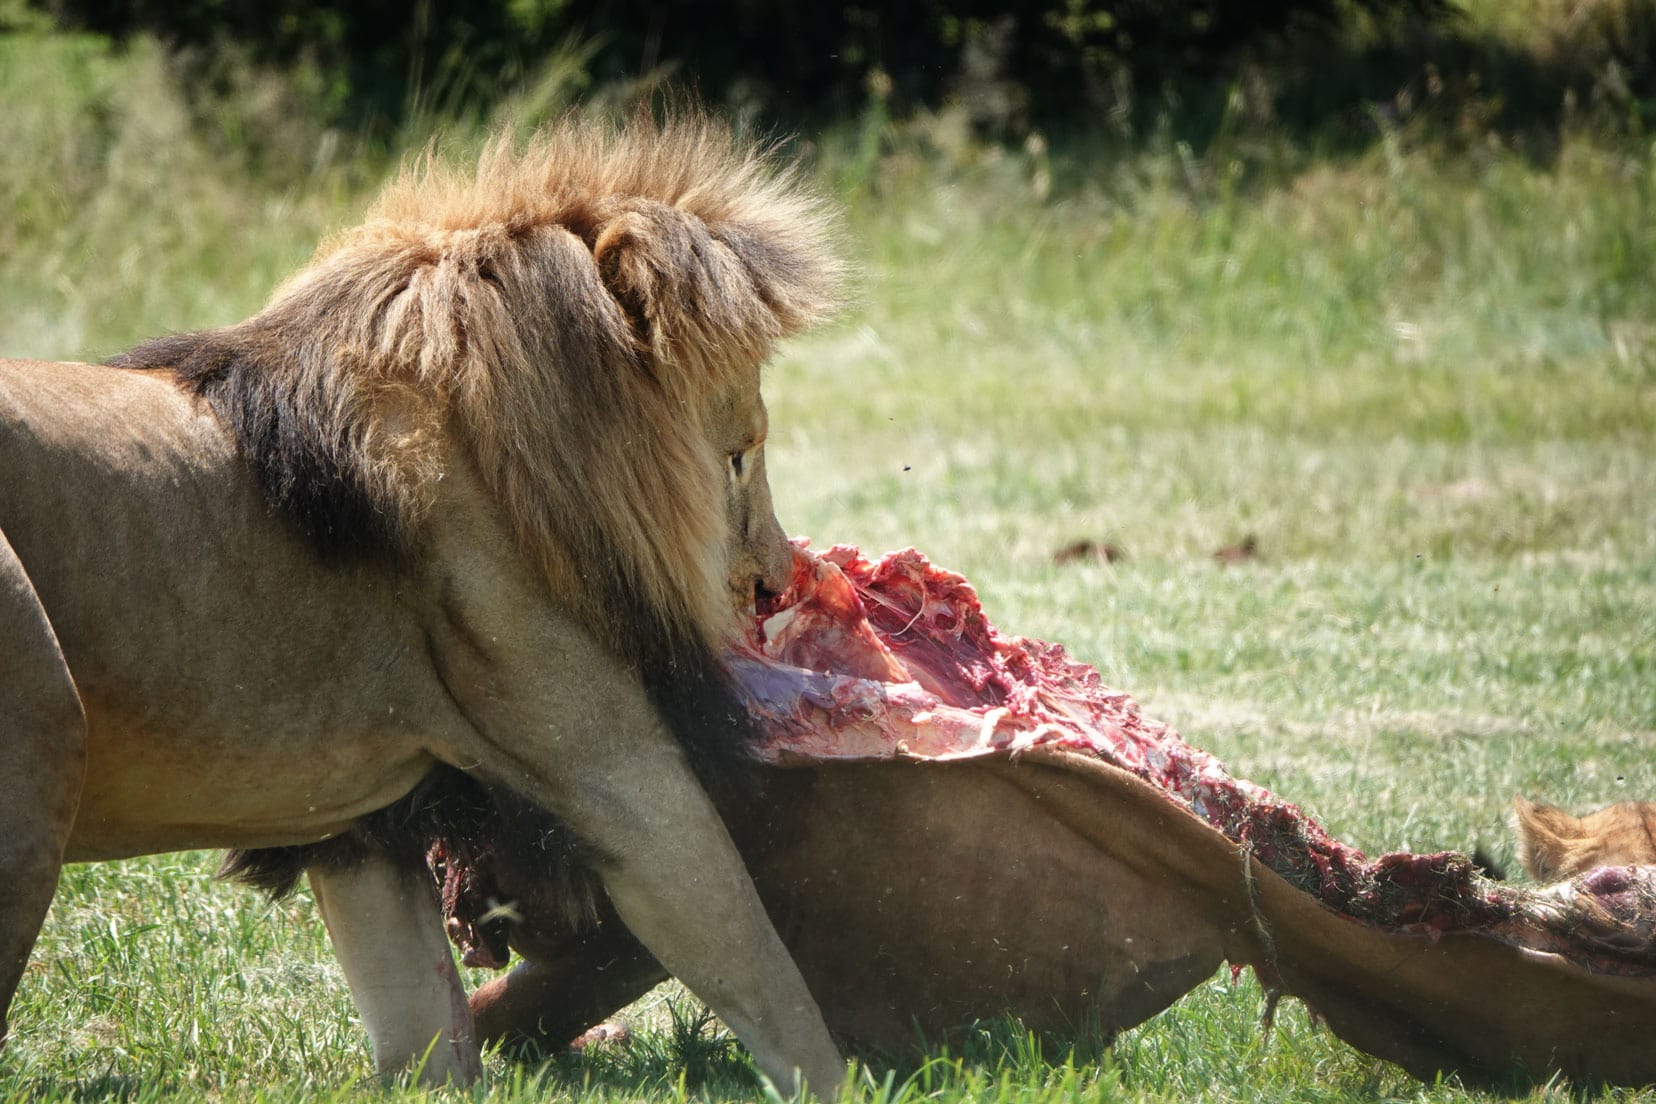 Lion tearing meat from a carcass